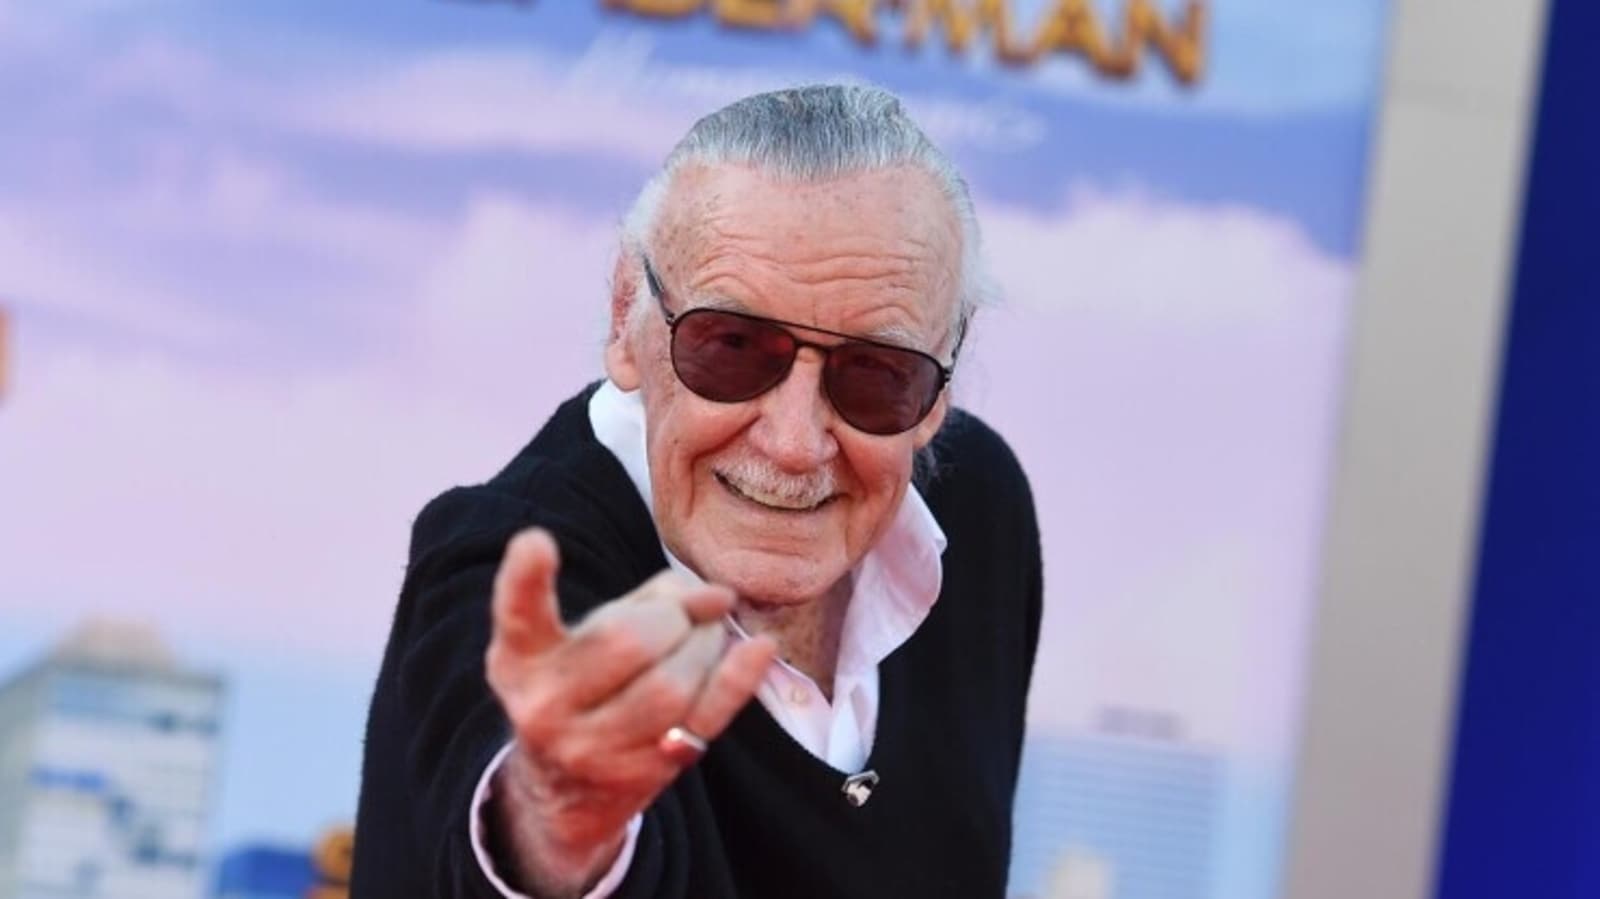 Marvel announces documentary on Stan Lee set to release in 2023, shares teaser on his 100th birthday